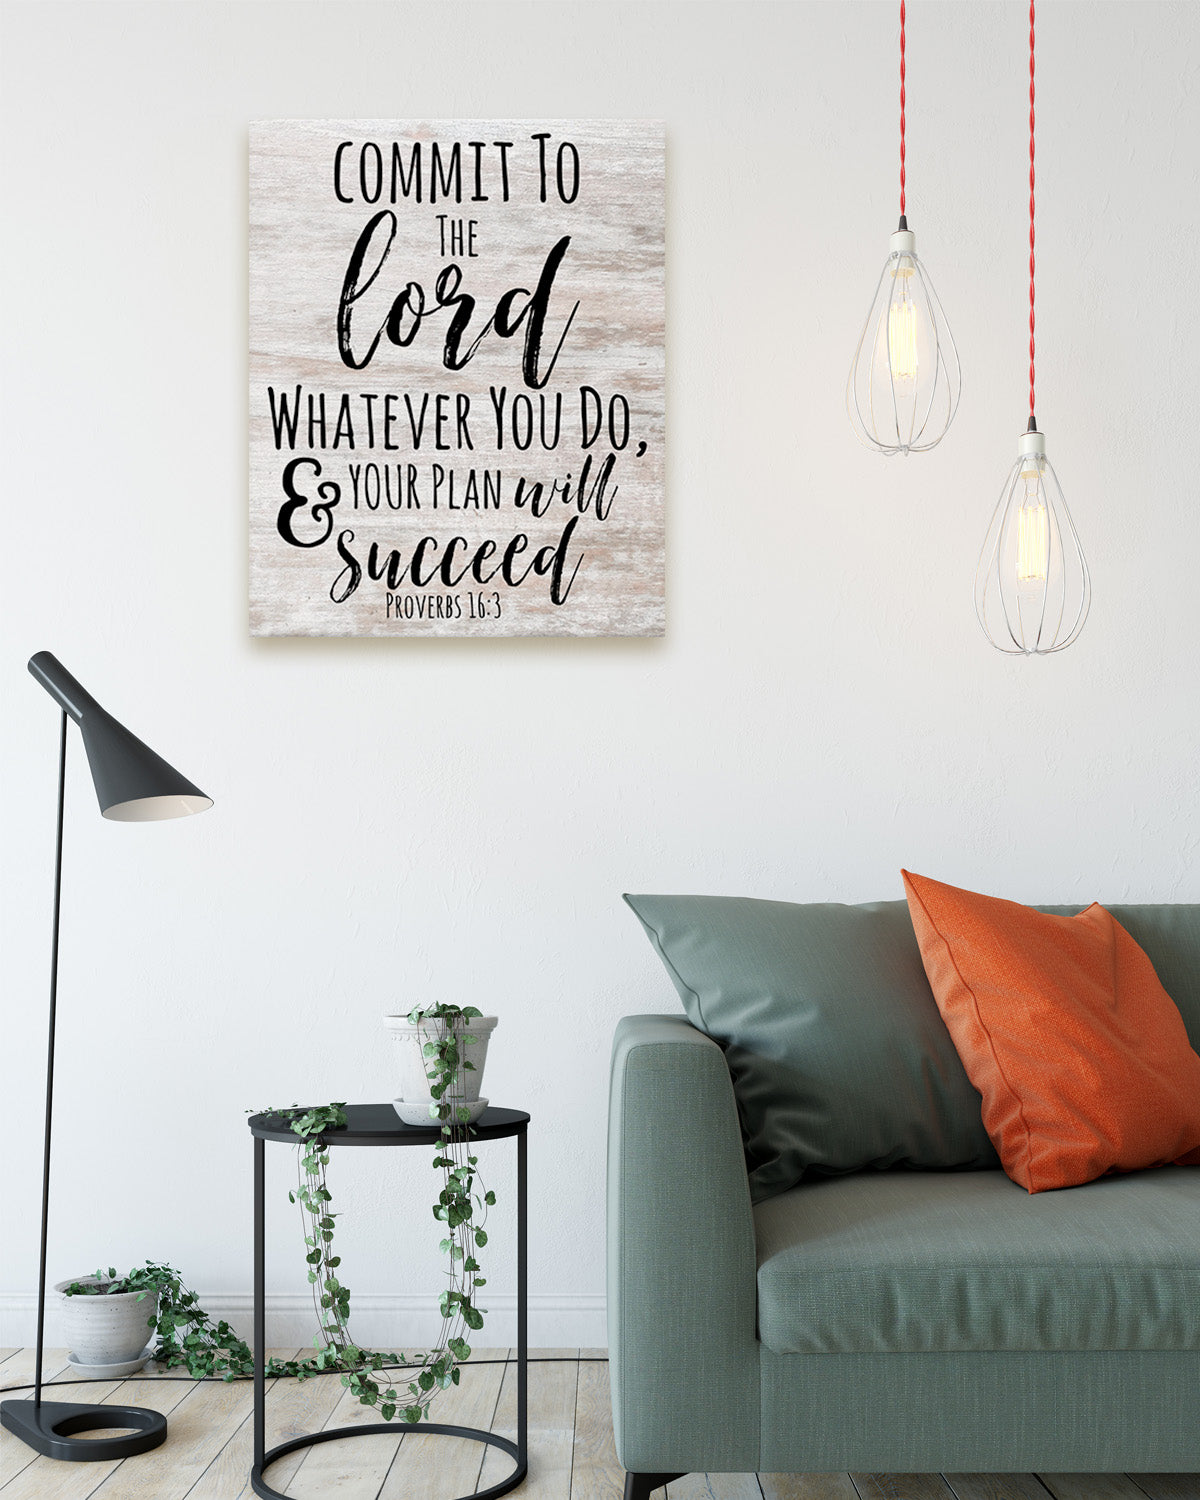 Govivo Commit To The Lord Christian room decor - Proverbs 16:3 motivational wall art - Rustic biblical verse wall decor - Wonderful gift for preacher and pastor